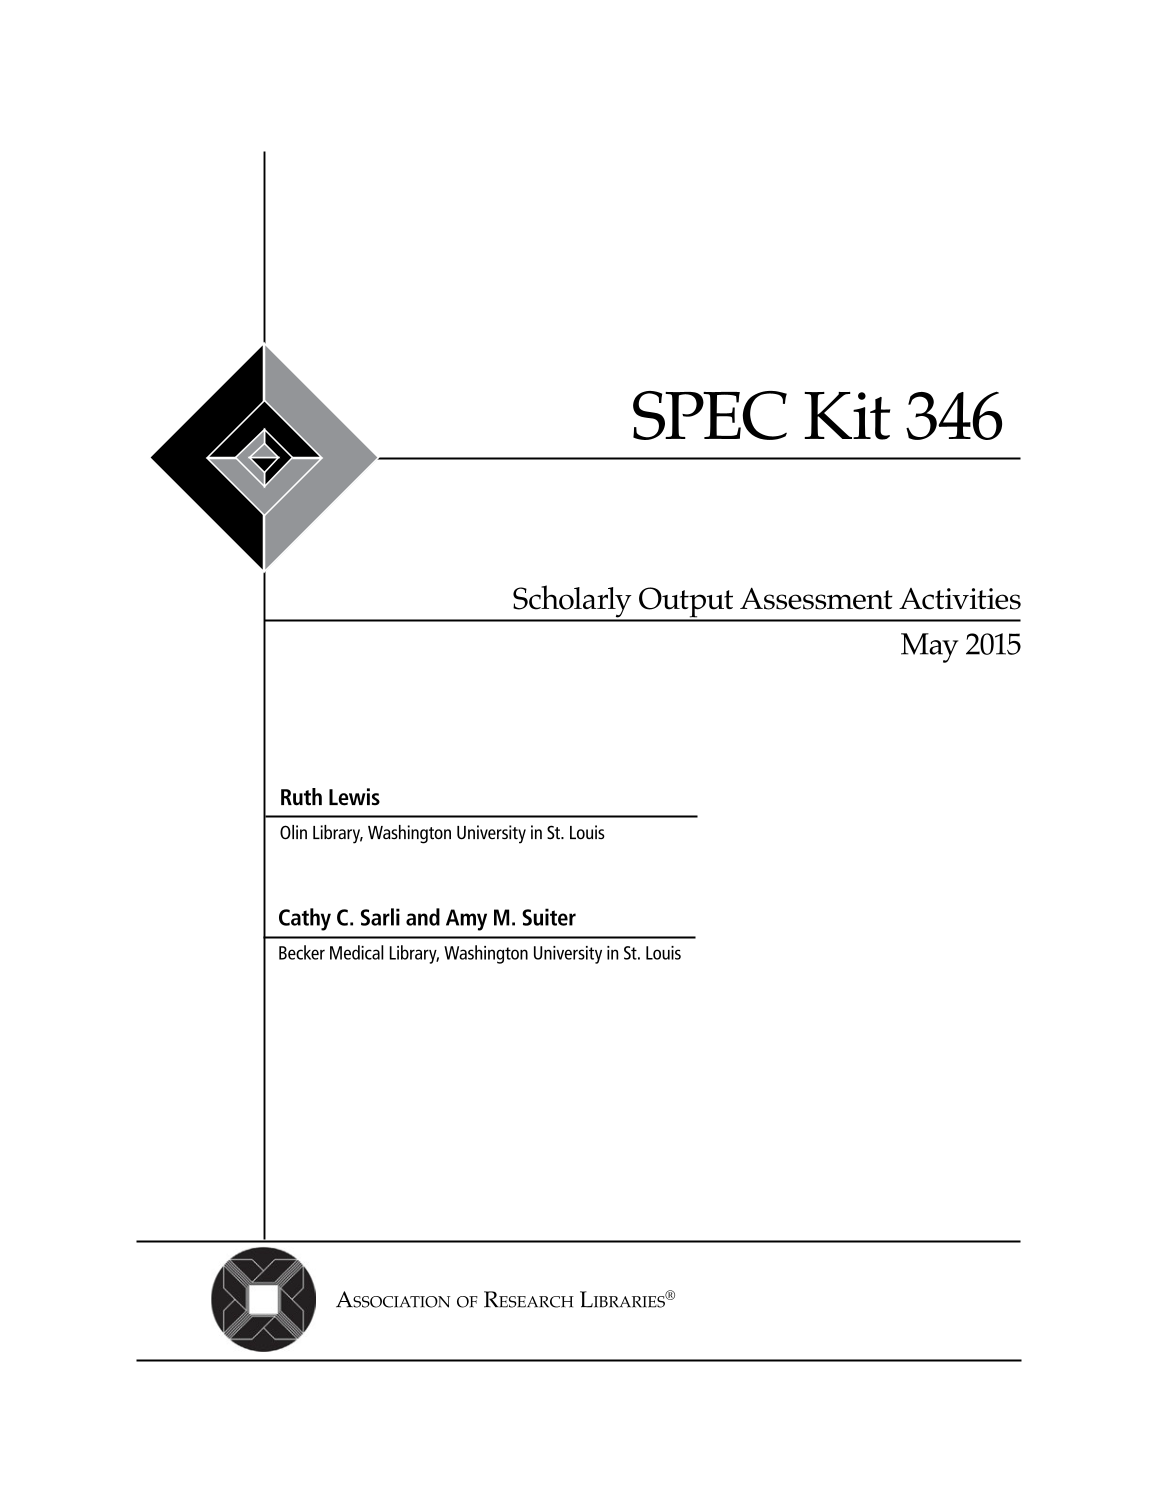 SPEC Kit 346: Scholarly Output Assessment Activities (May 2015) page 3